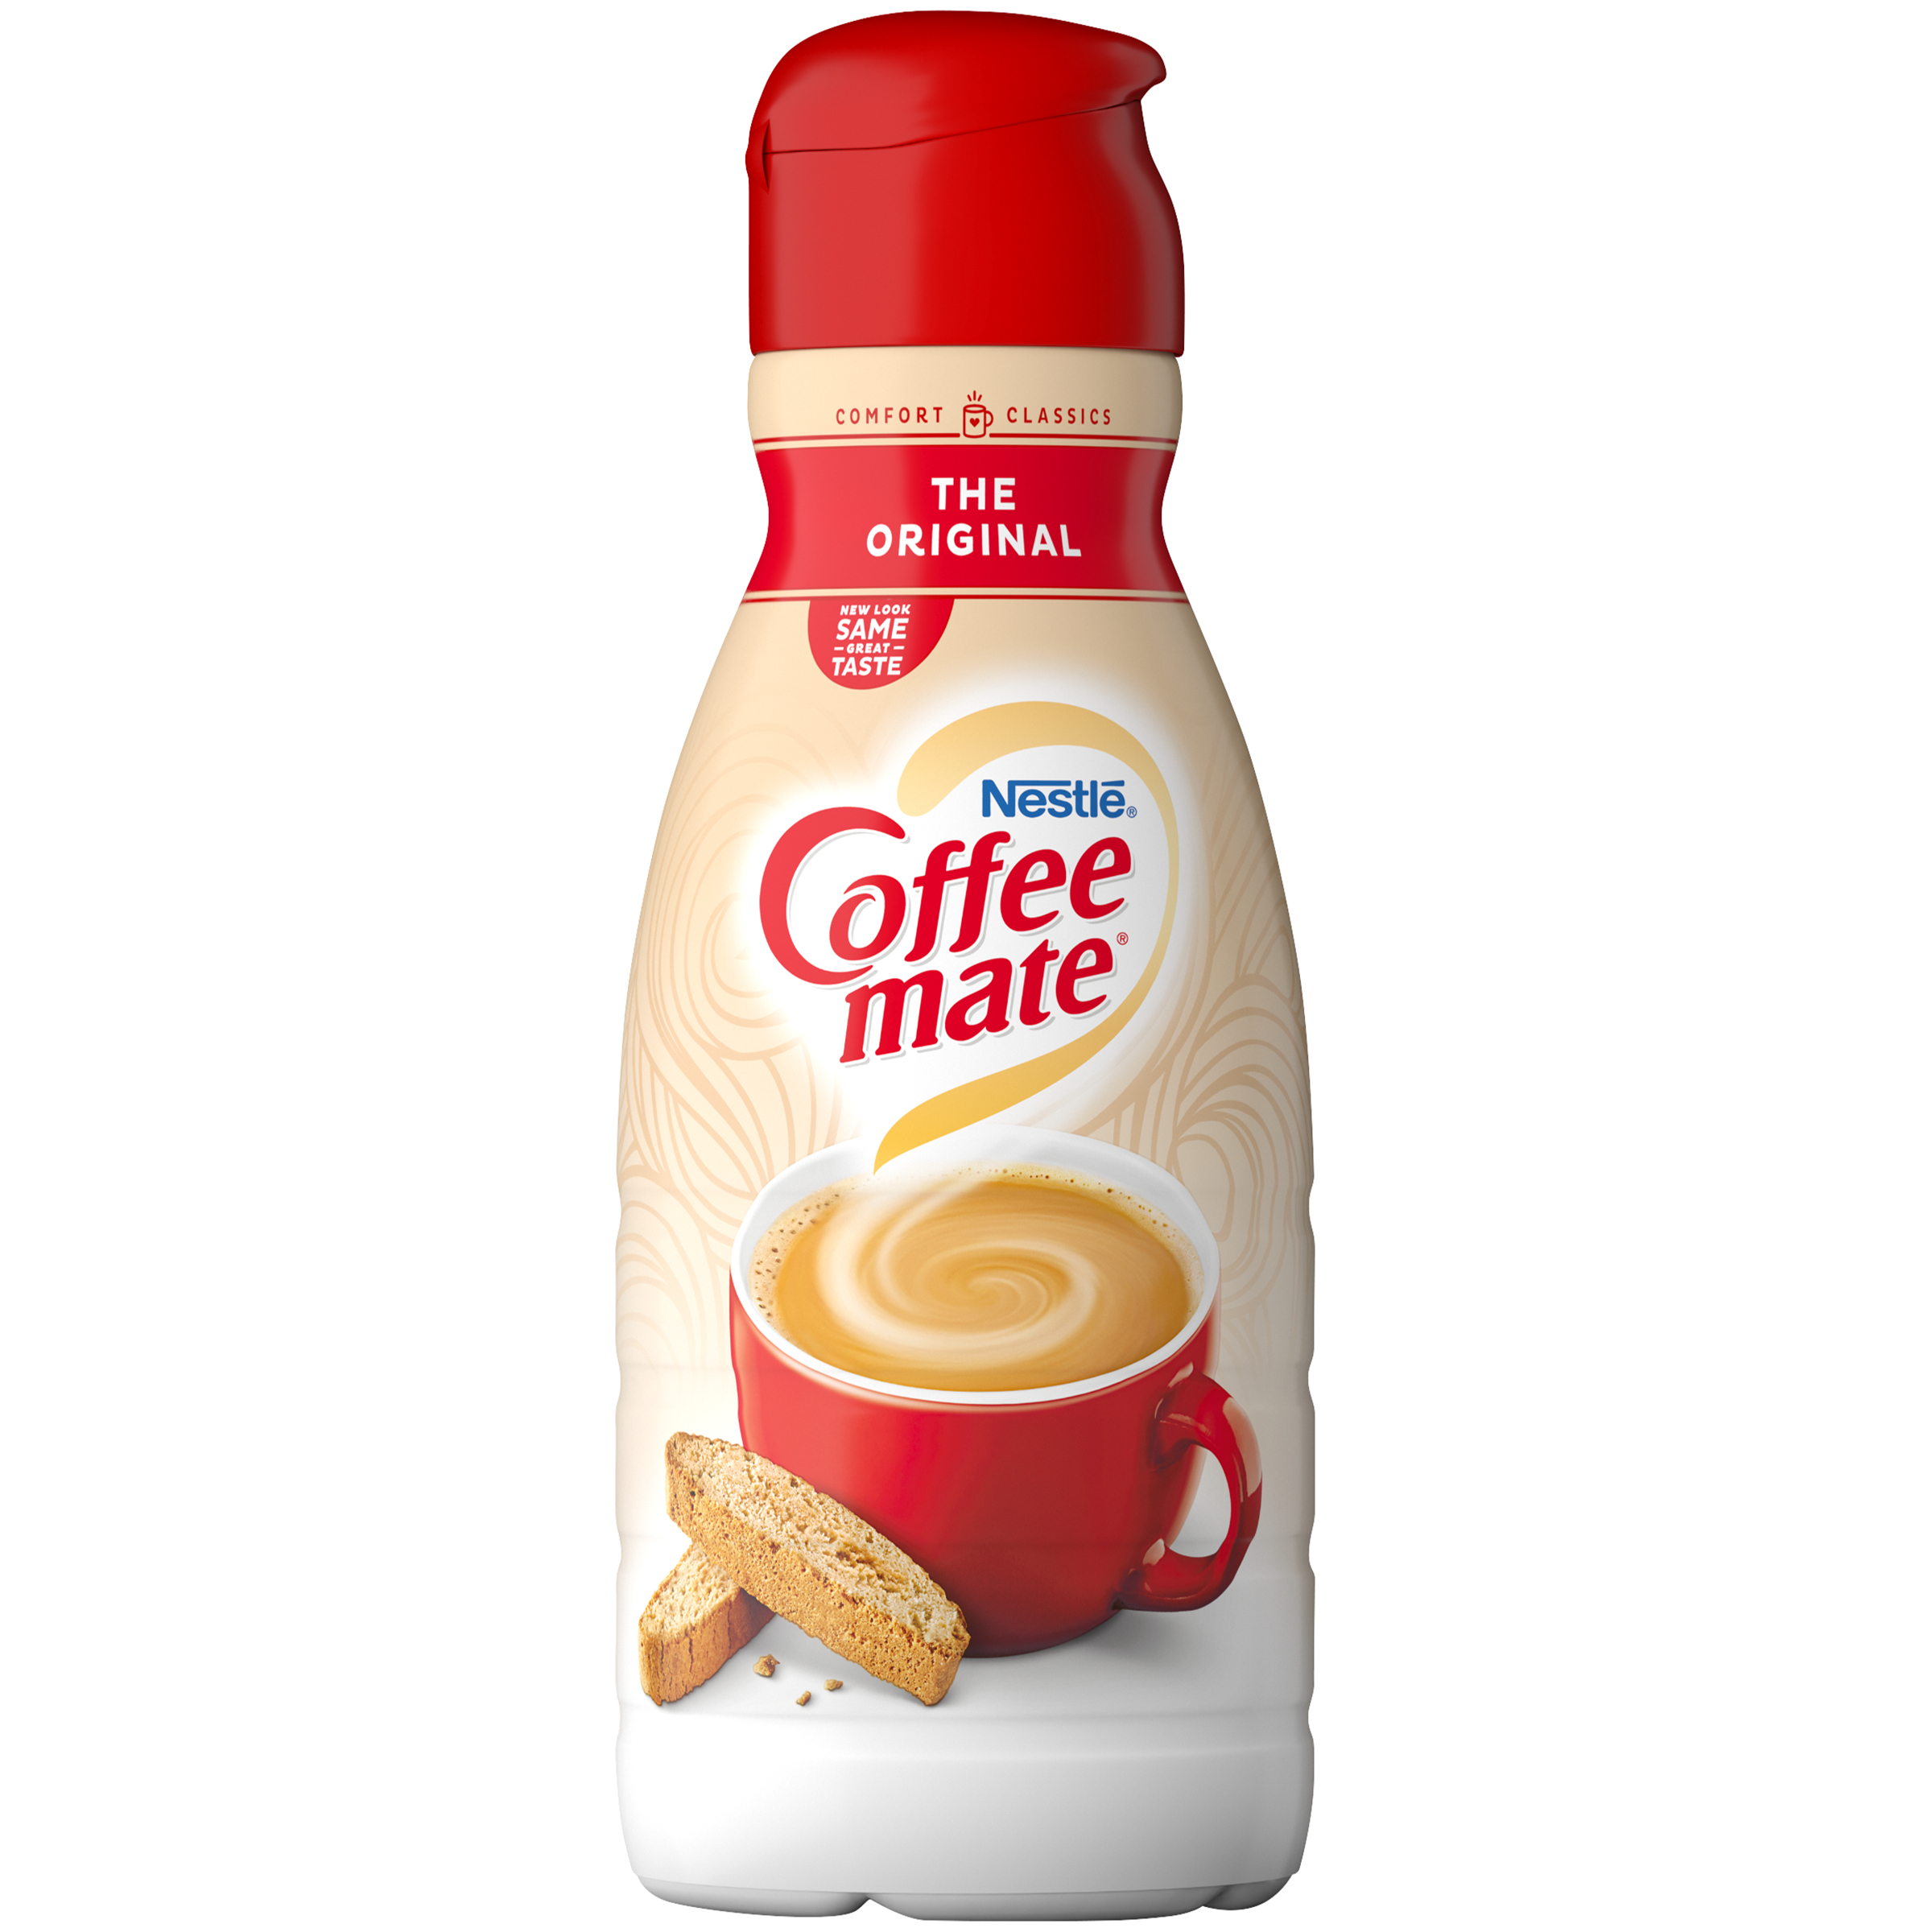 What's Really in Your Coffee Mate Creamer?